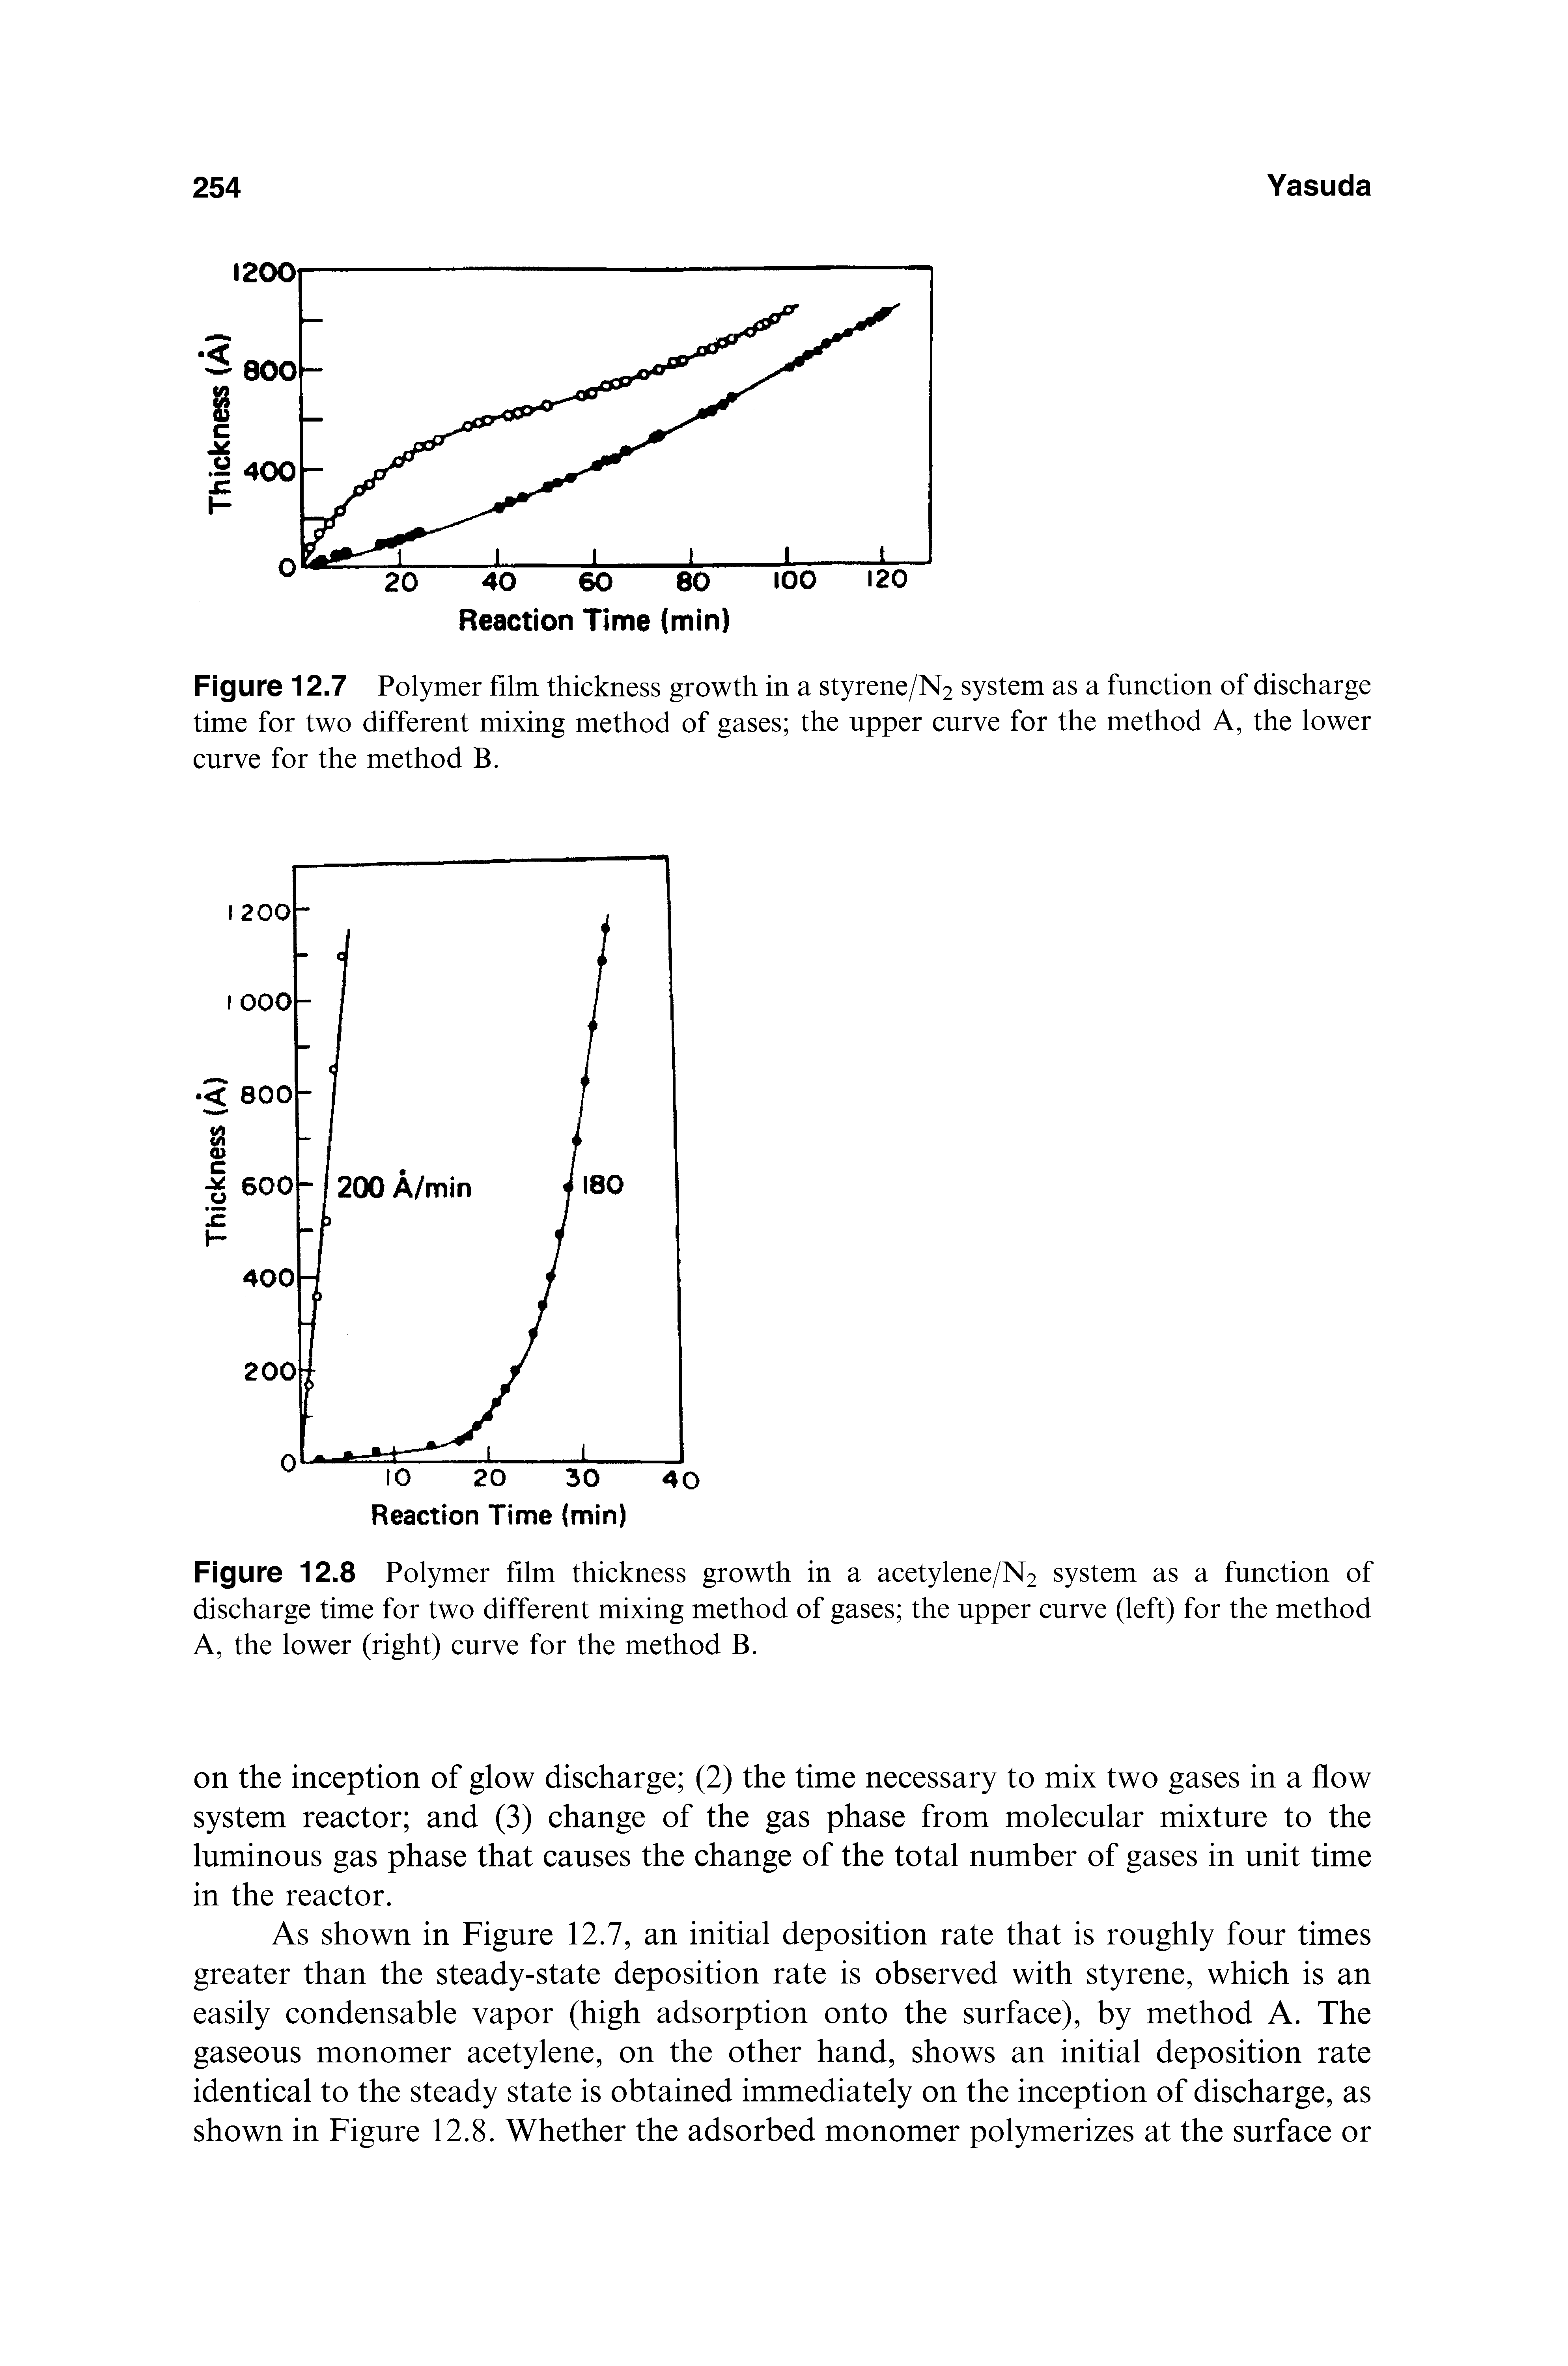 Figure 12.7 Polymer film thickness growth in a styrene/N2 system as a function of discharge time for two different mixing method of gases the upper curve for the method A, the lower curve for the method B.